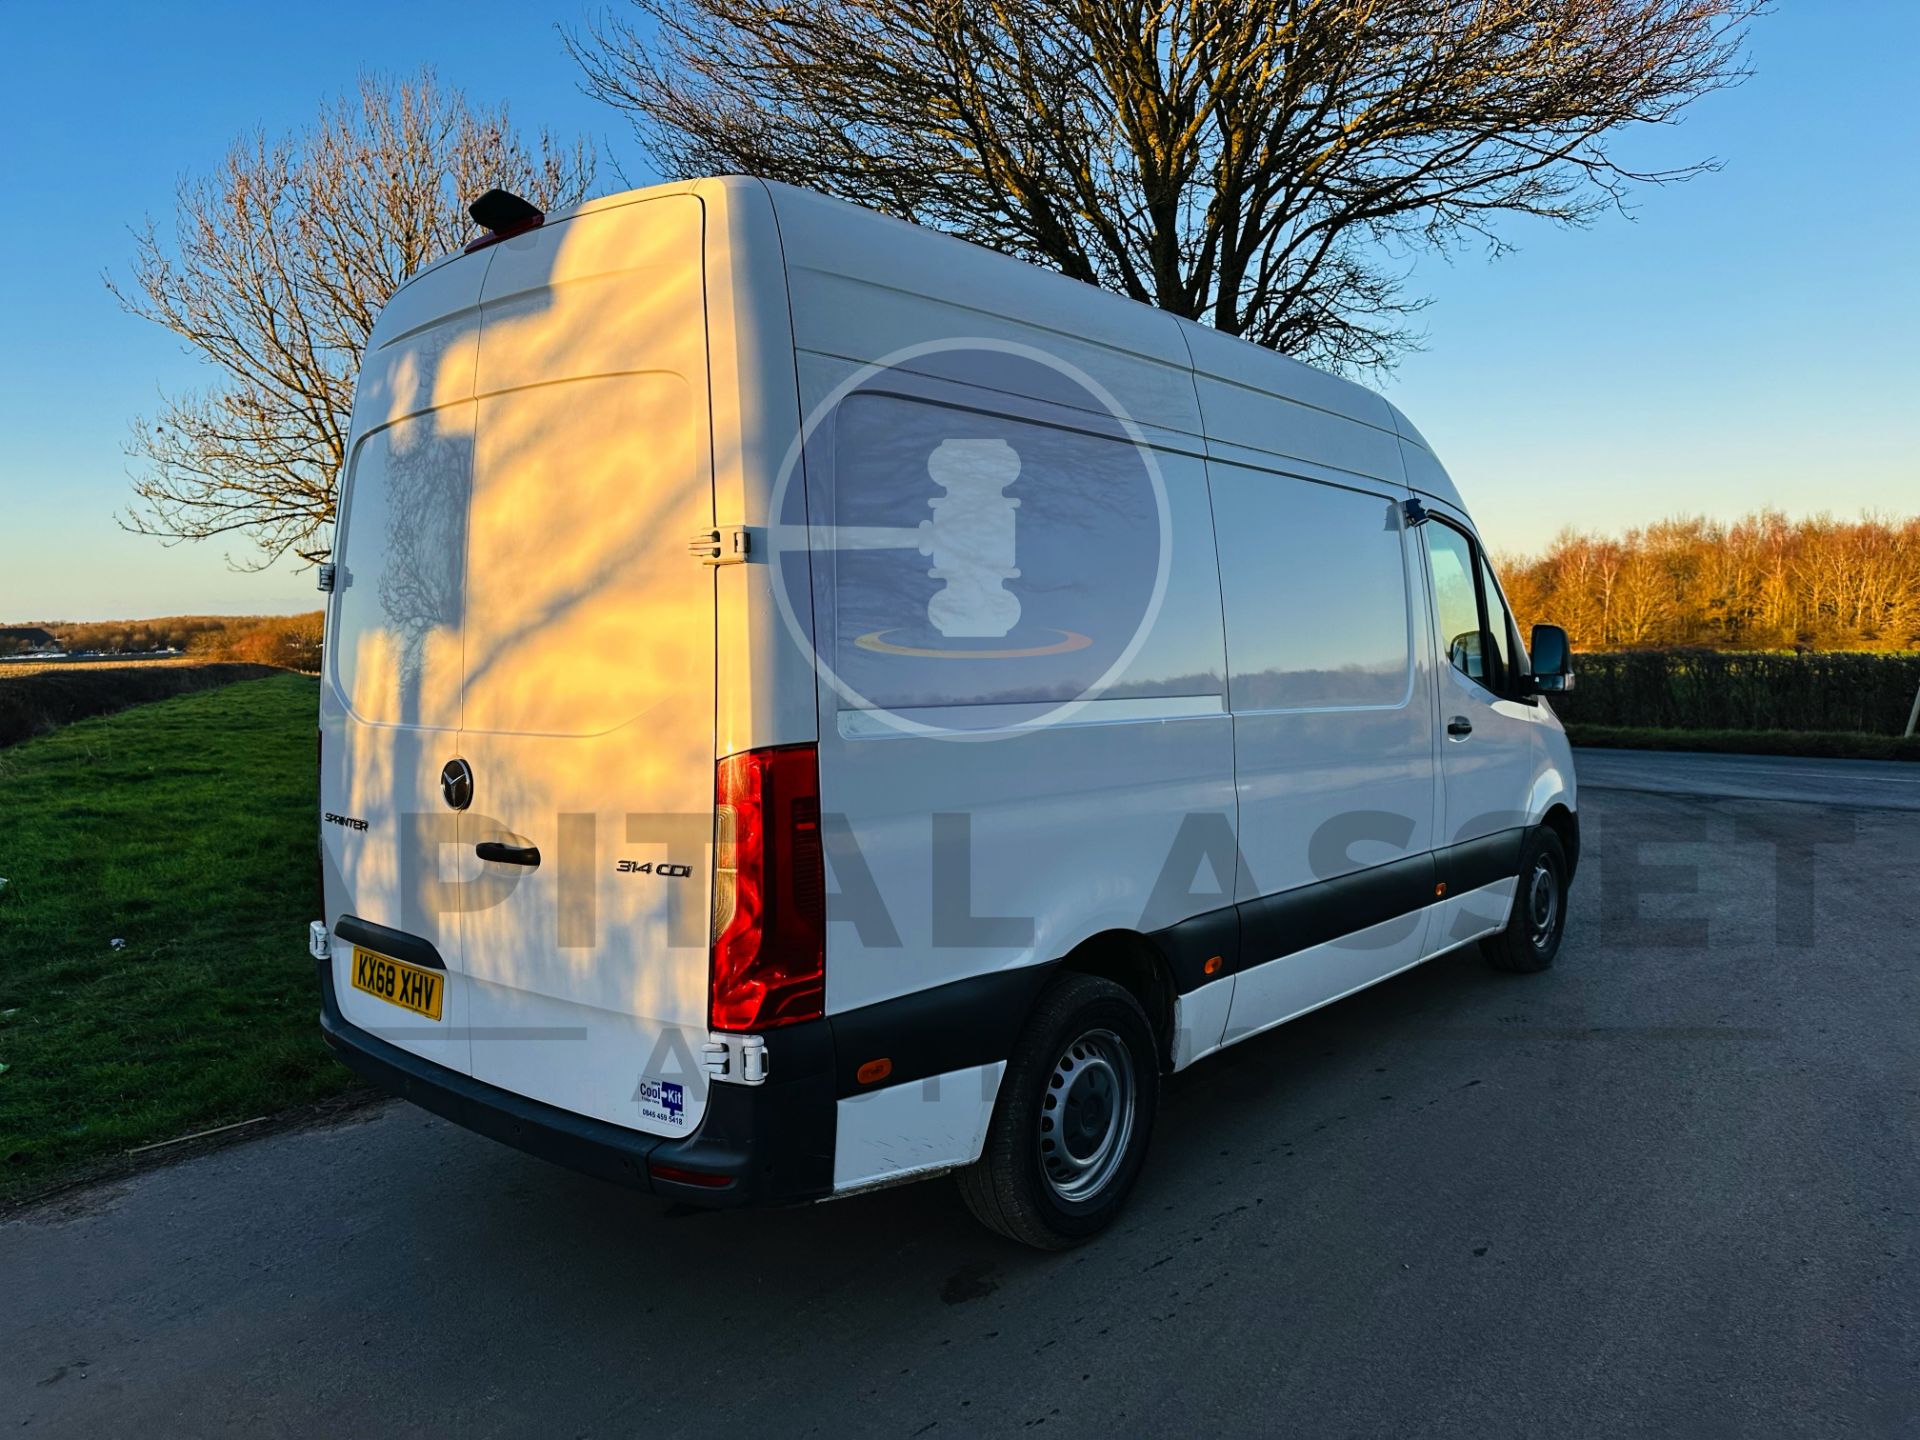 MERCEDES-BENZ SPRINTER 314 CDI *MWB - REFRIGERATED VAN* (2019 - FACELIFT MODEL) *OVERNIGHT STANDBY* - Image 9 of 33